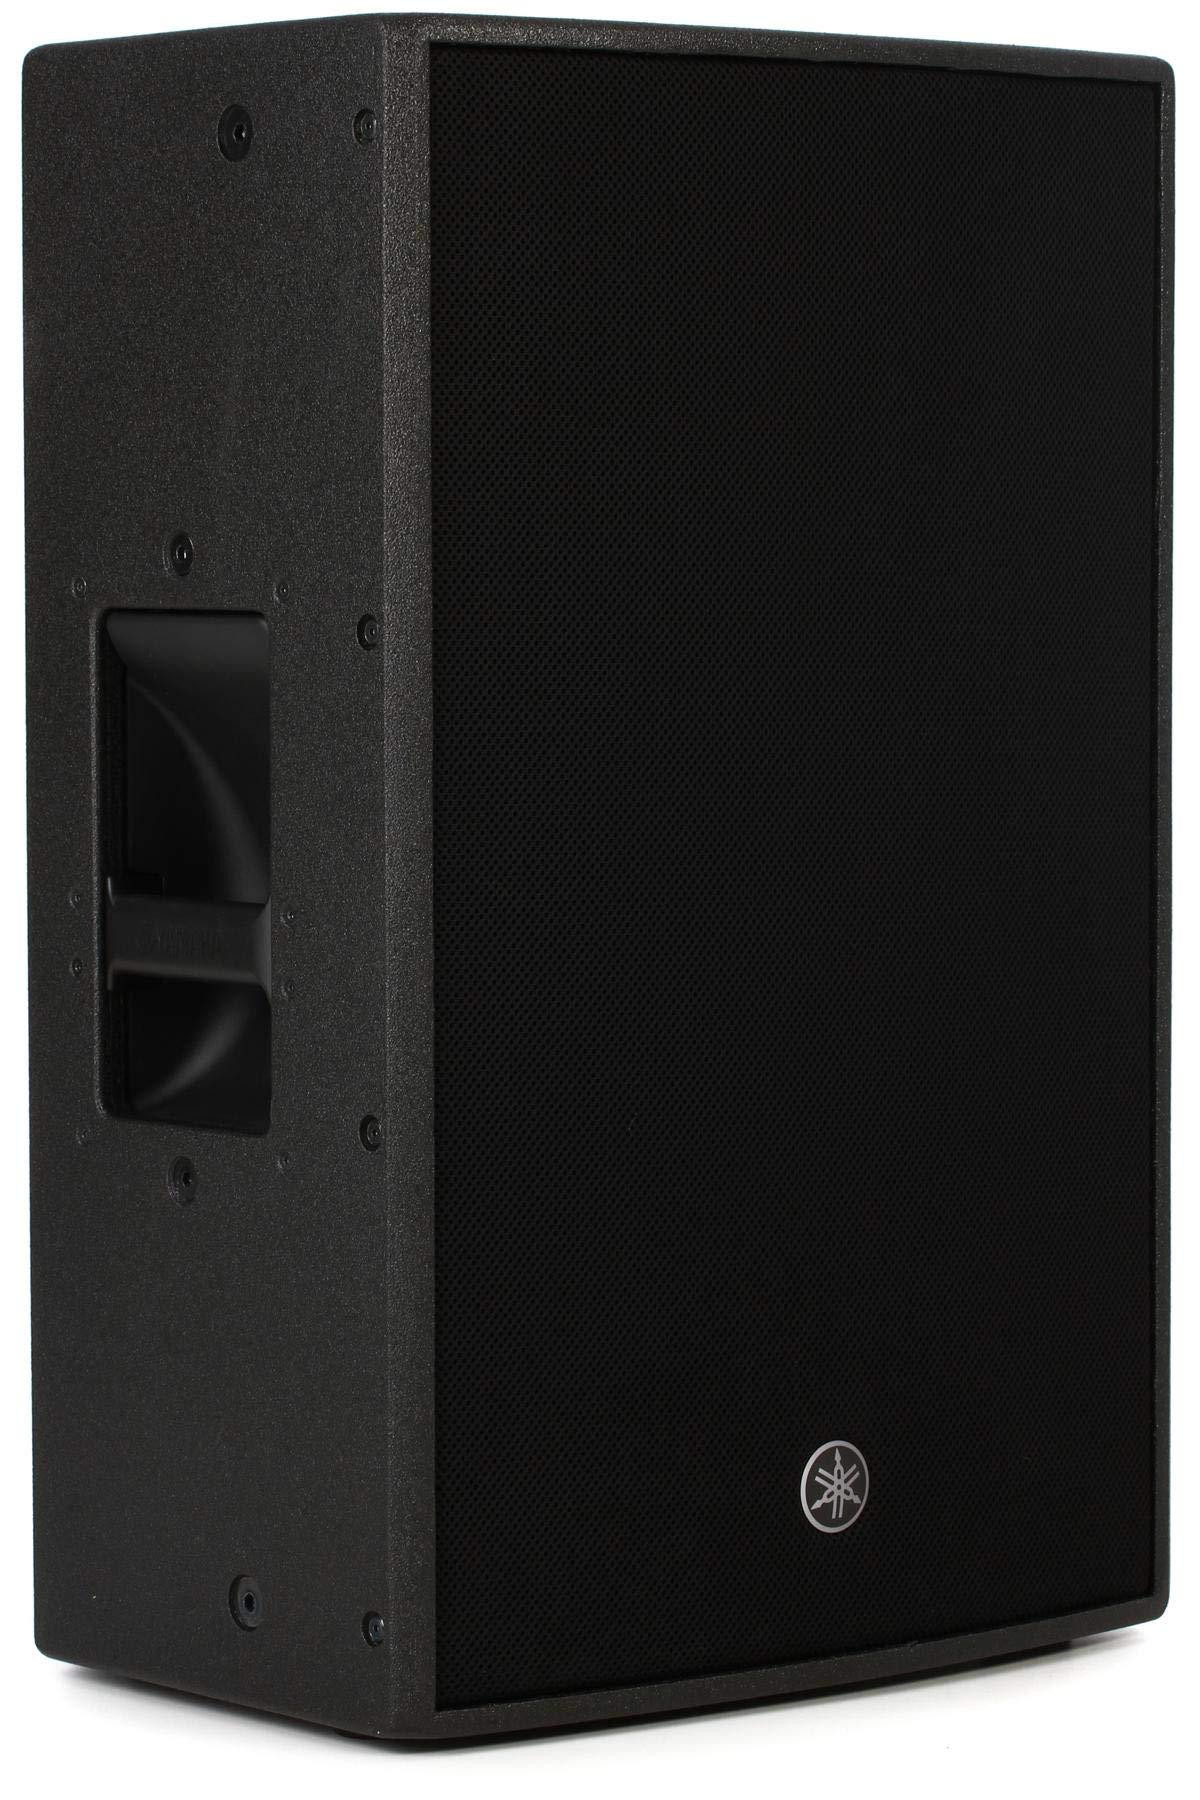 Yamaha DZR12 Powered Speaker,2000 Watts Powered PA Speaker with 12" LF Driver, 2" HF Driver, and DSP (Each)